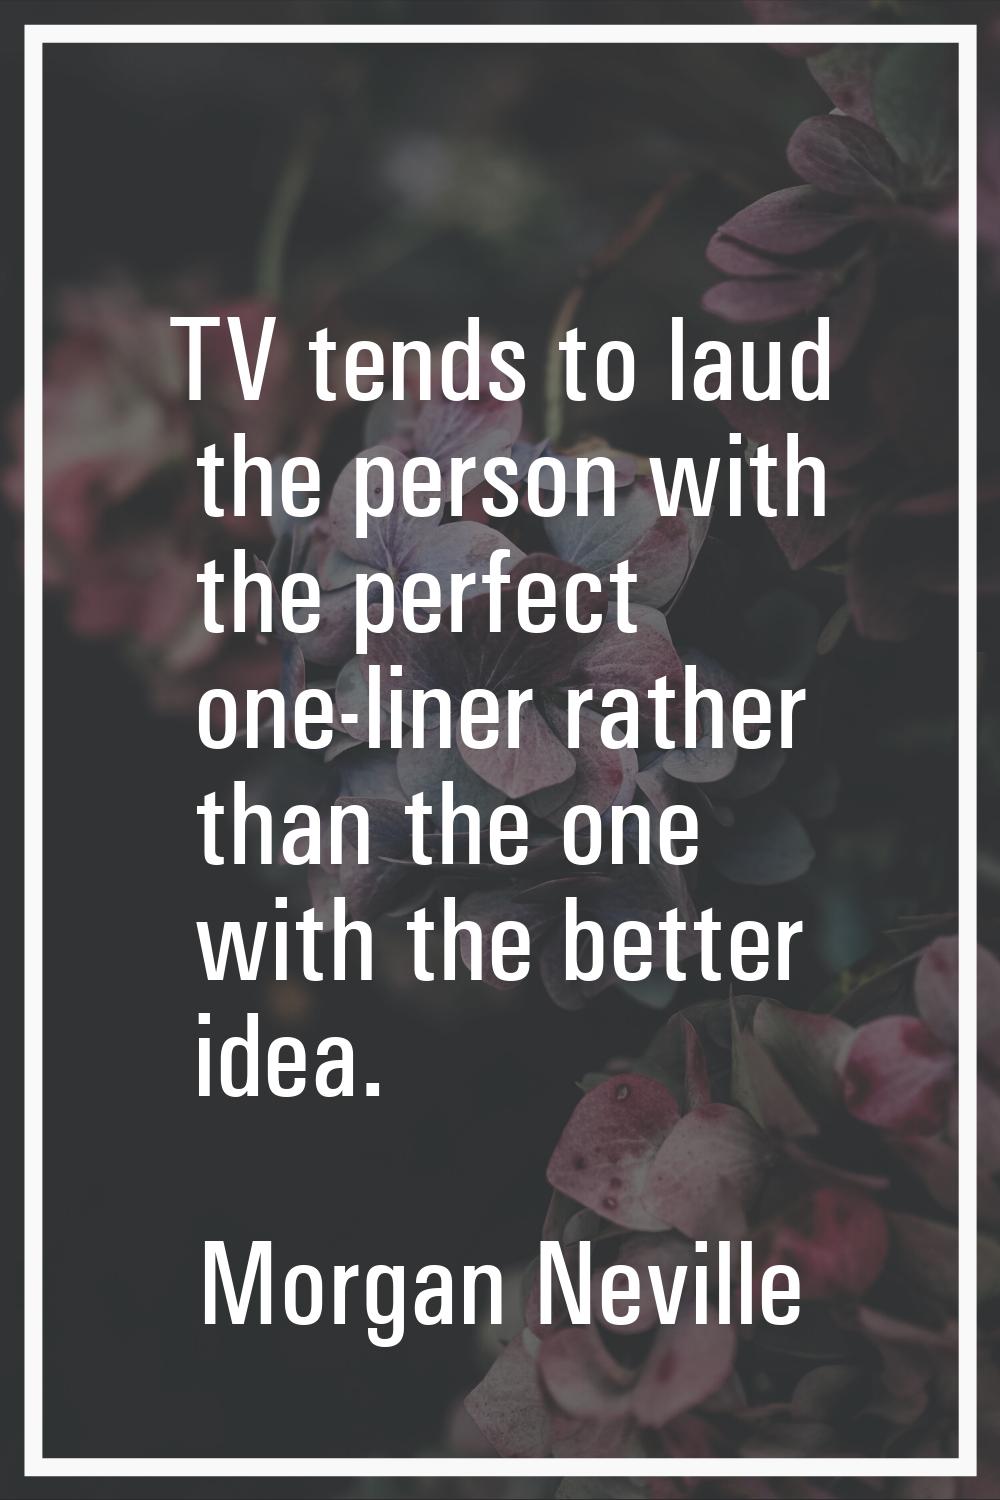 TV tends to laud the person with the perfect one-liner rather than the one with the better idea.